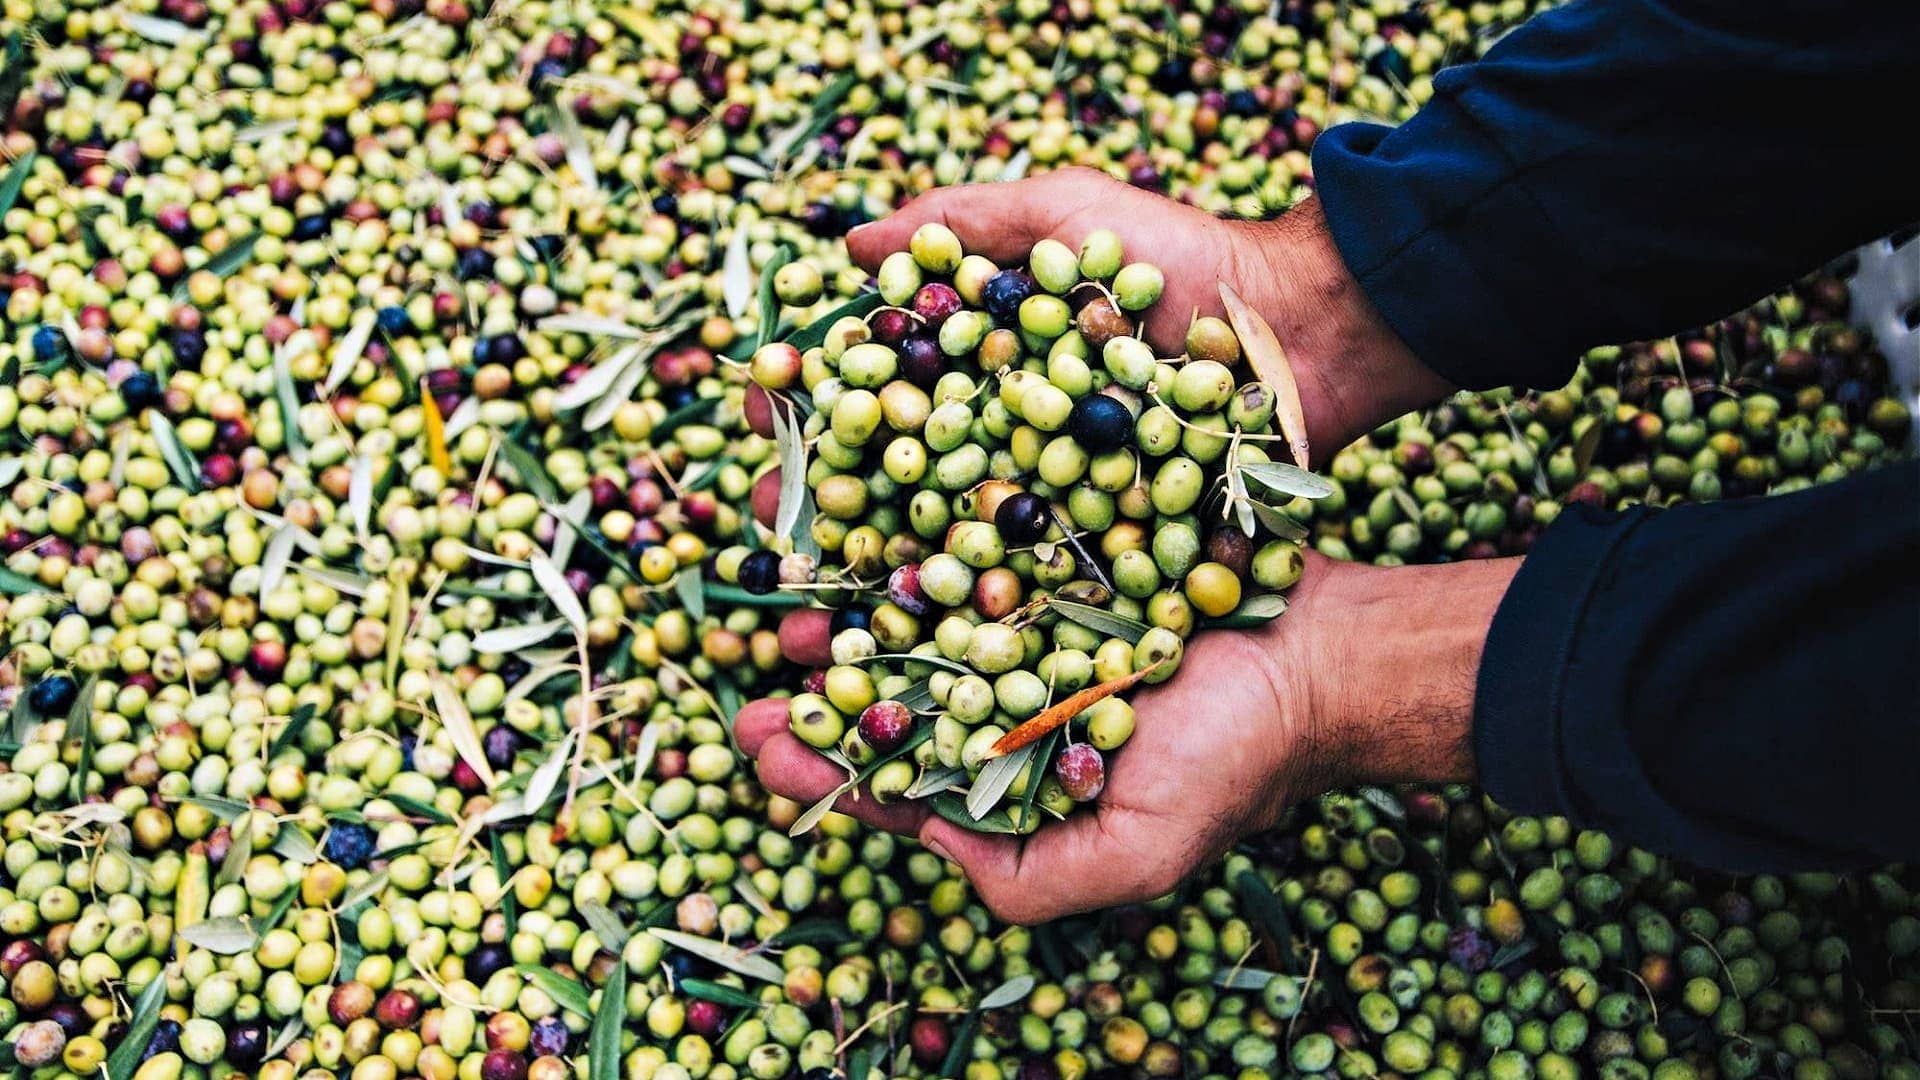 north-america-the-best-olive-oils-competitions-production-awards-for-california-producers-validate-high-evoo-standards-olive-oil-times